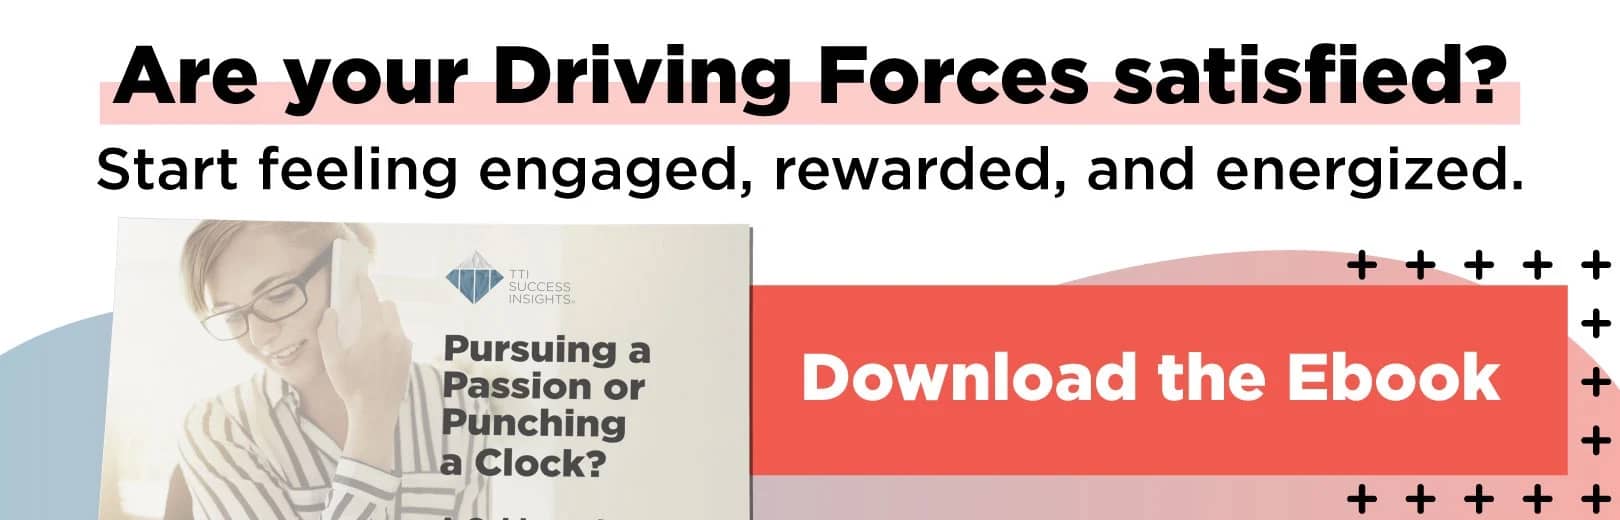 Are your Driving Forces satisfied? Download Ebook